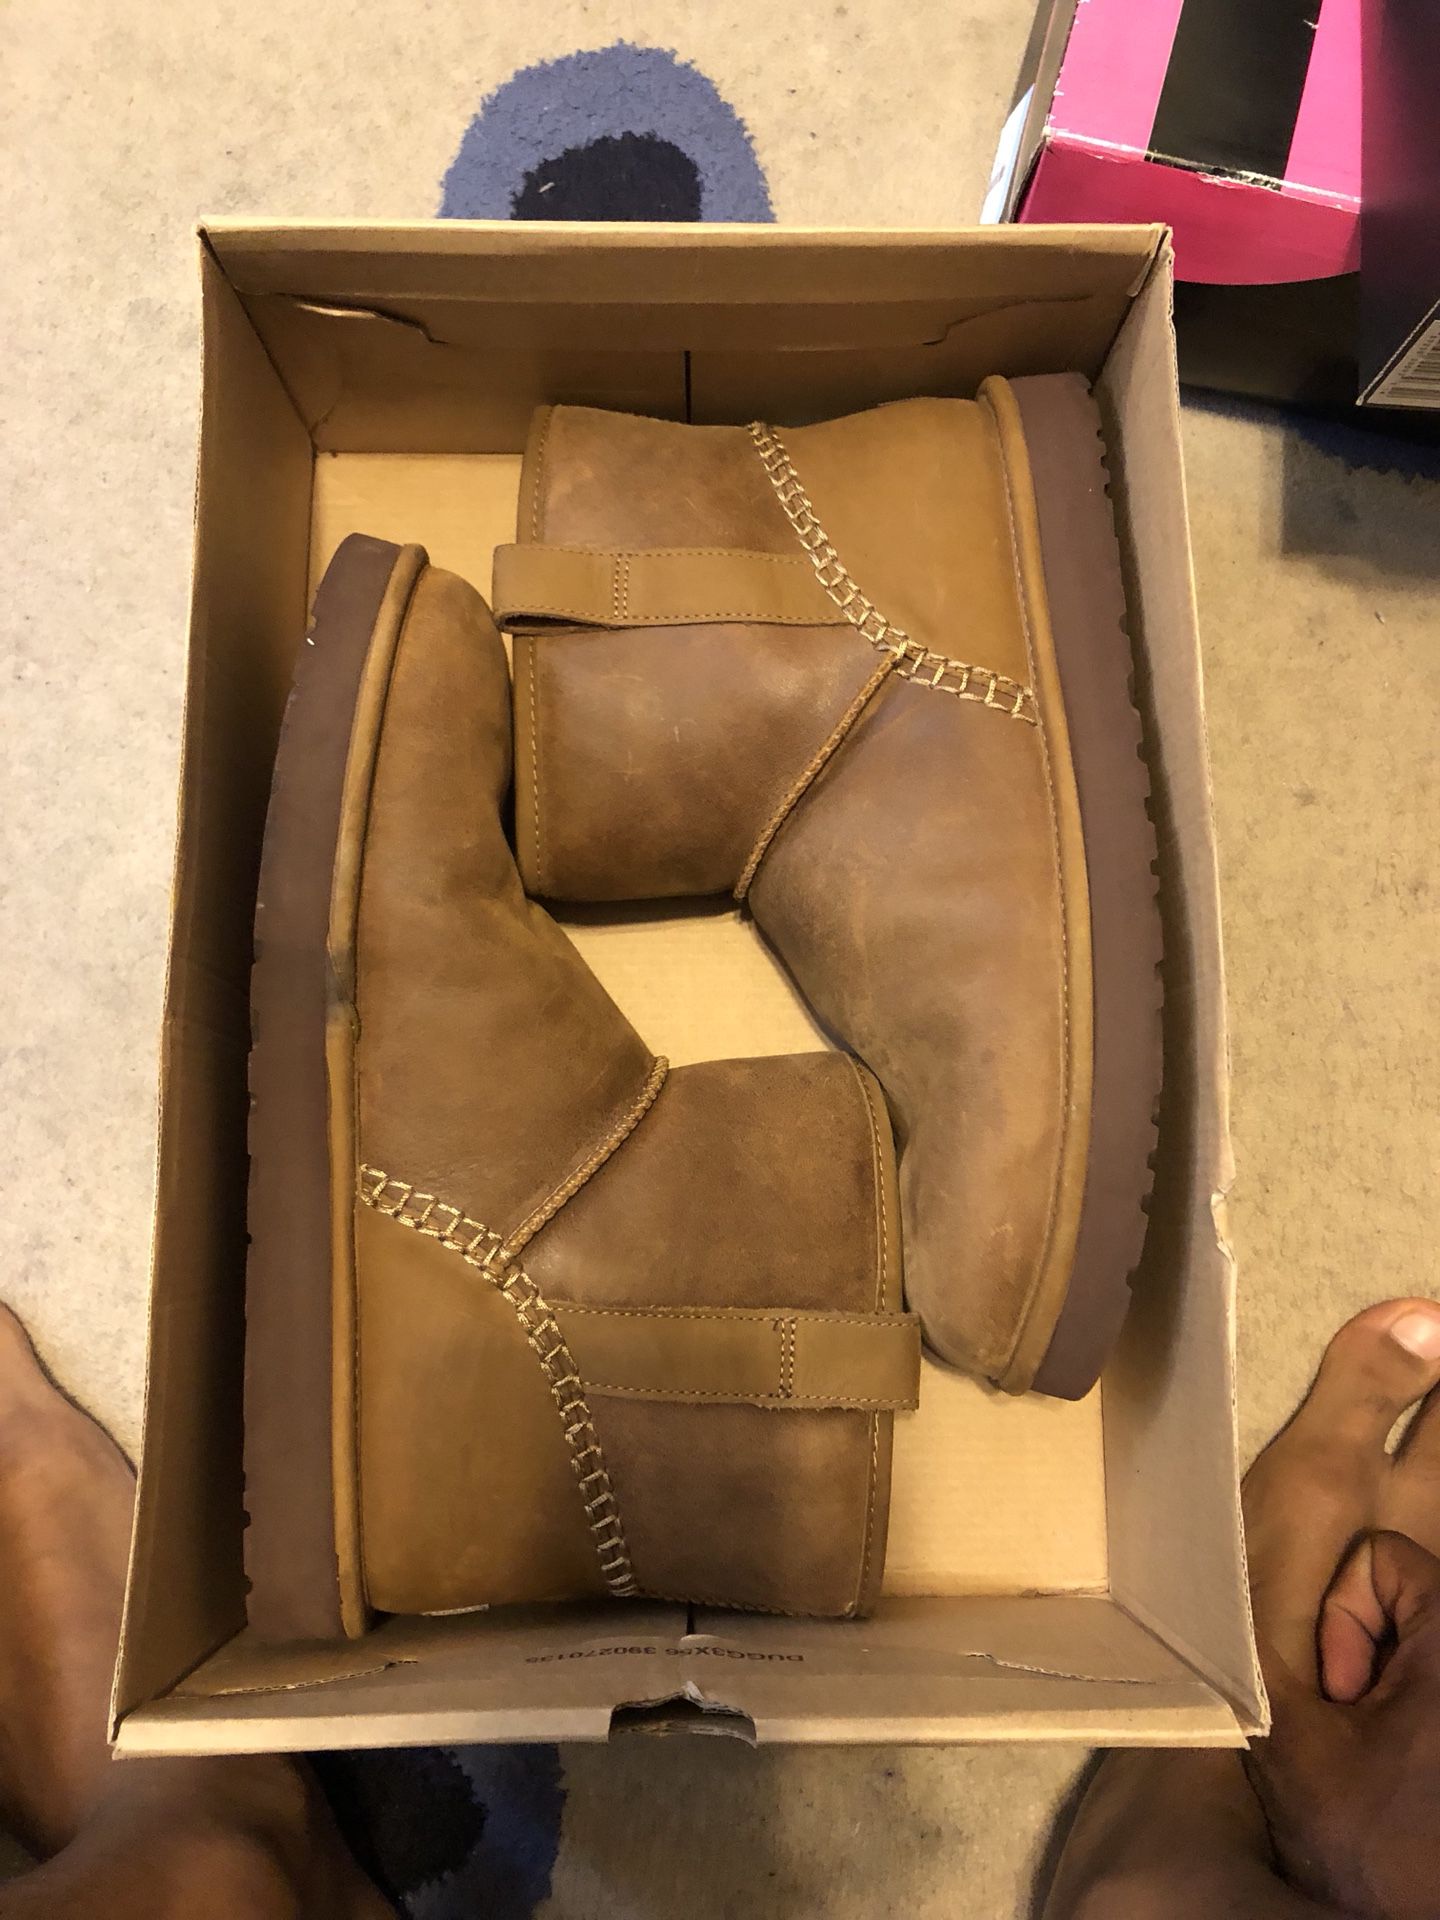 Uggs men’s deco mini size 12 $25 firm today only